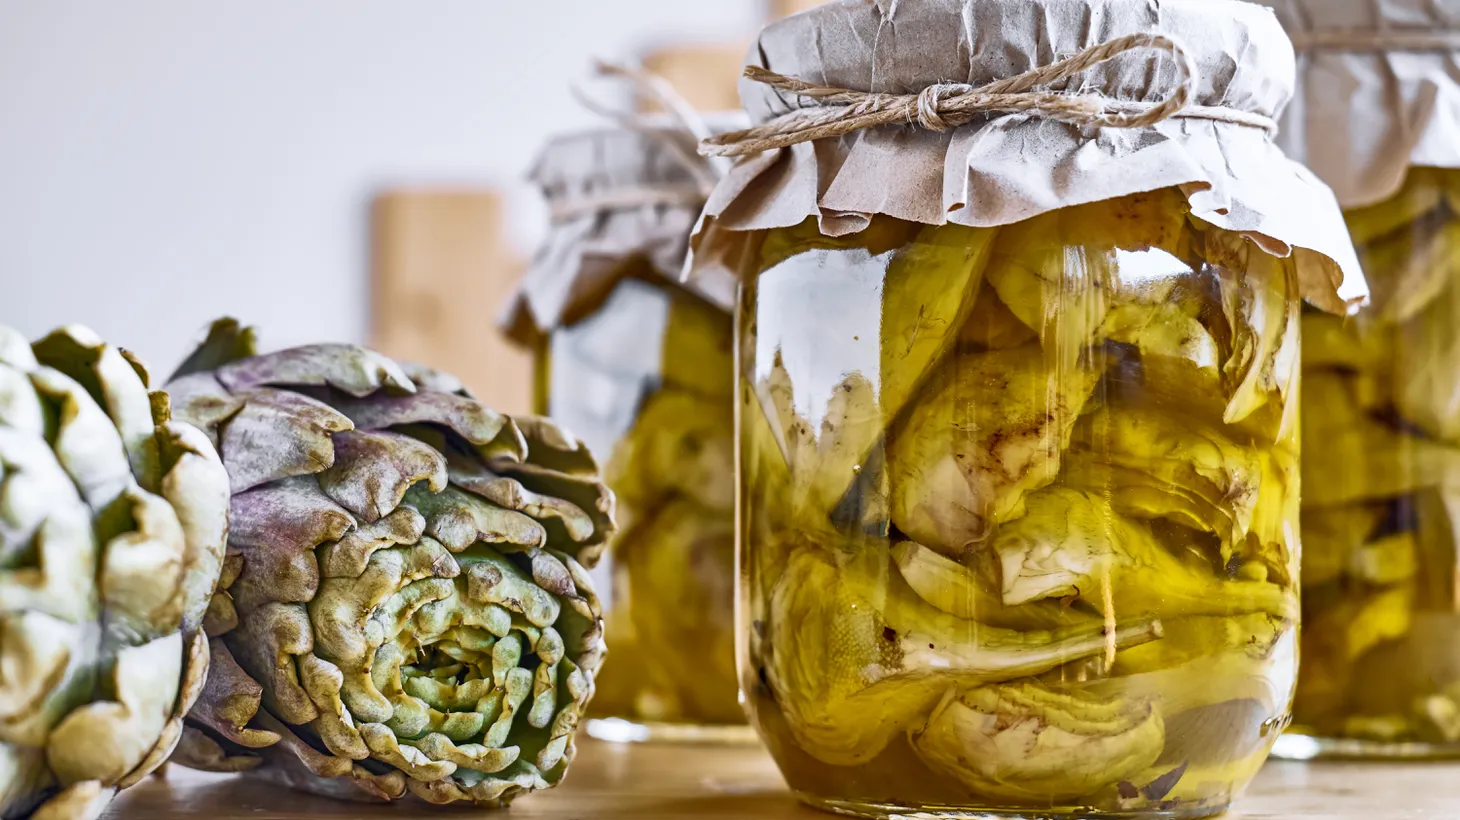 Marinated artichokes in the jar are a convenient cooking ingredient.